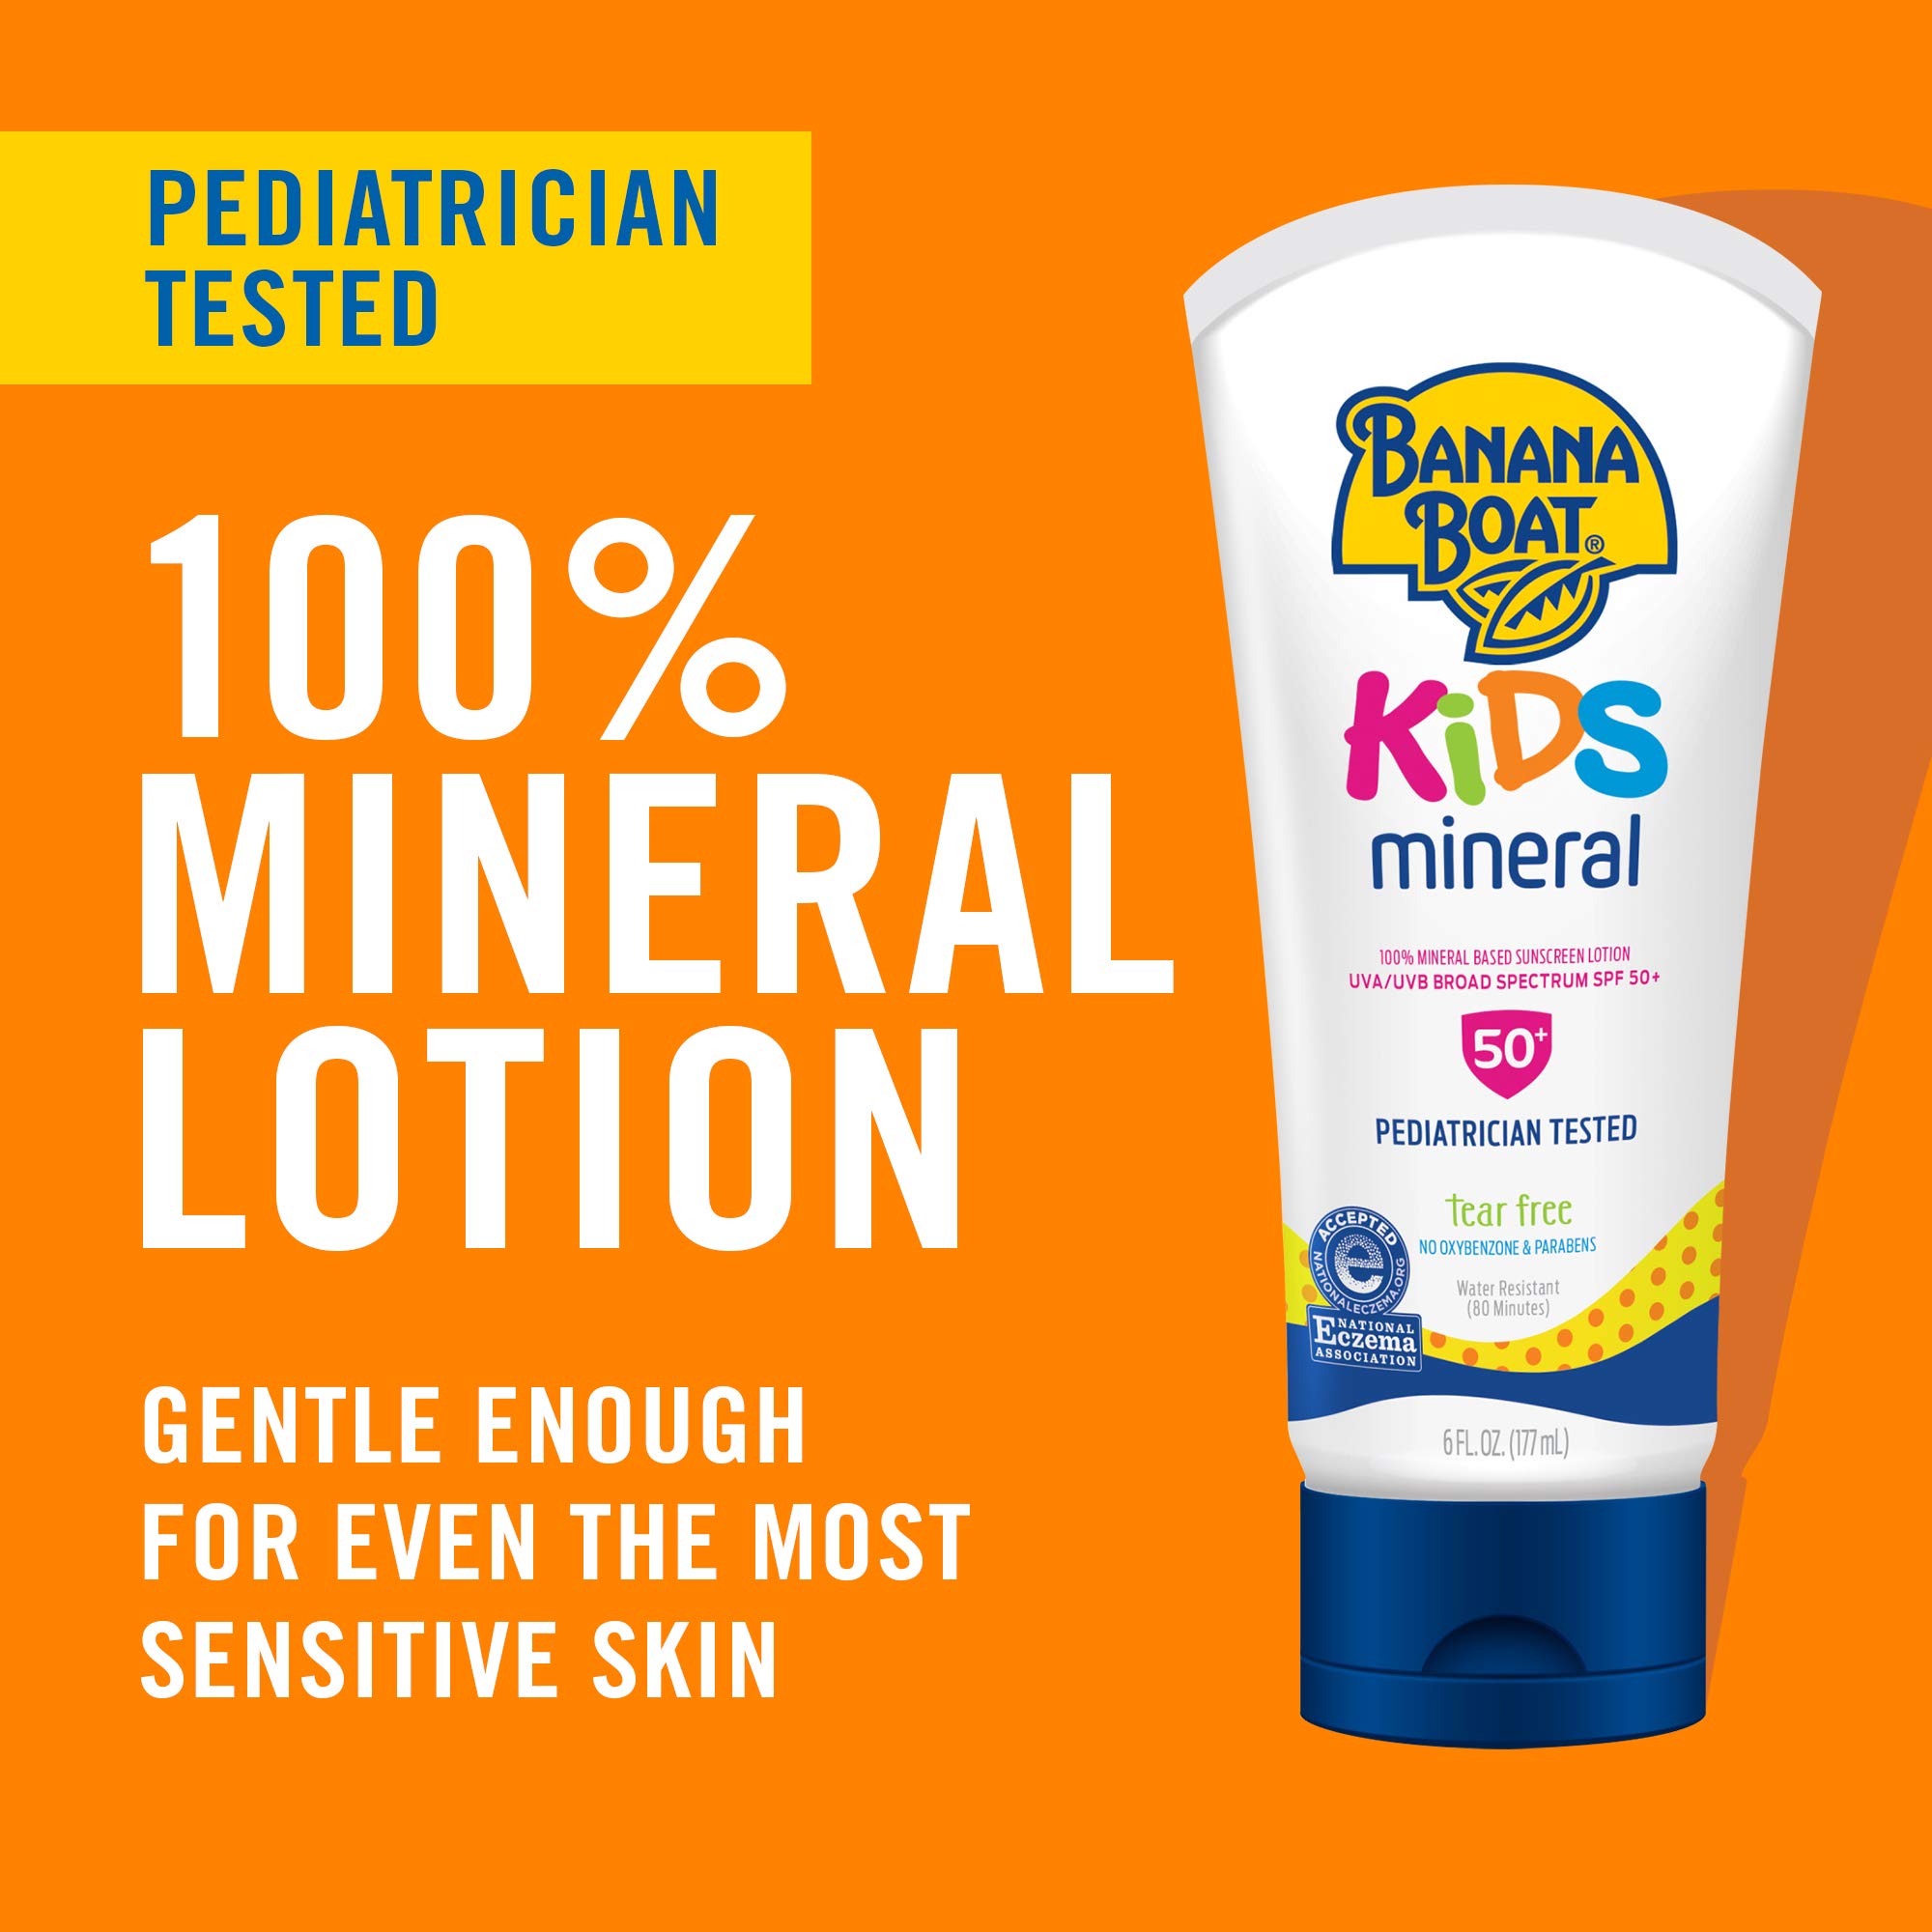 Banana Boat Kids 100% Mineral, Tear-Free, Broad Spectrum Sunscreen Lotion, SPF 50, 6oz, Twin Pack